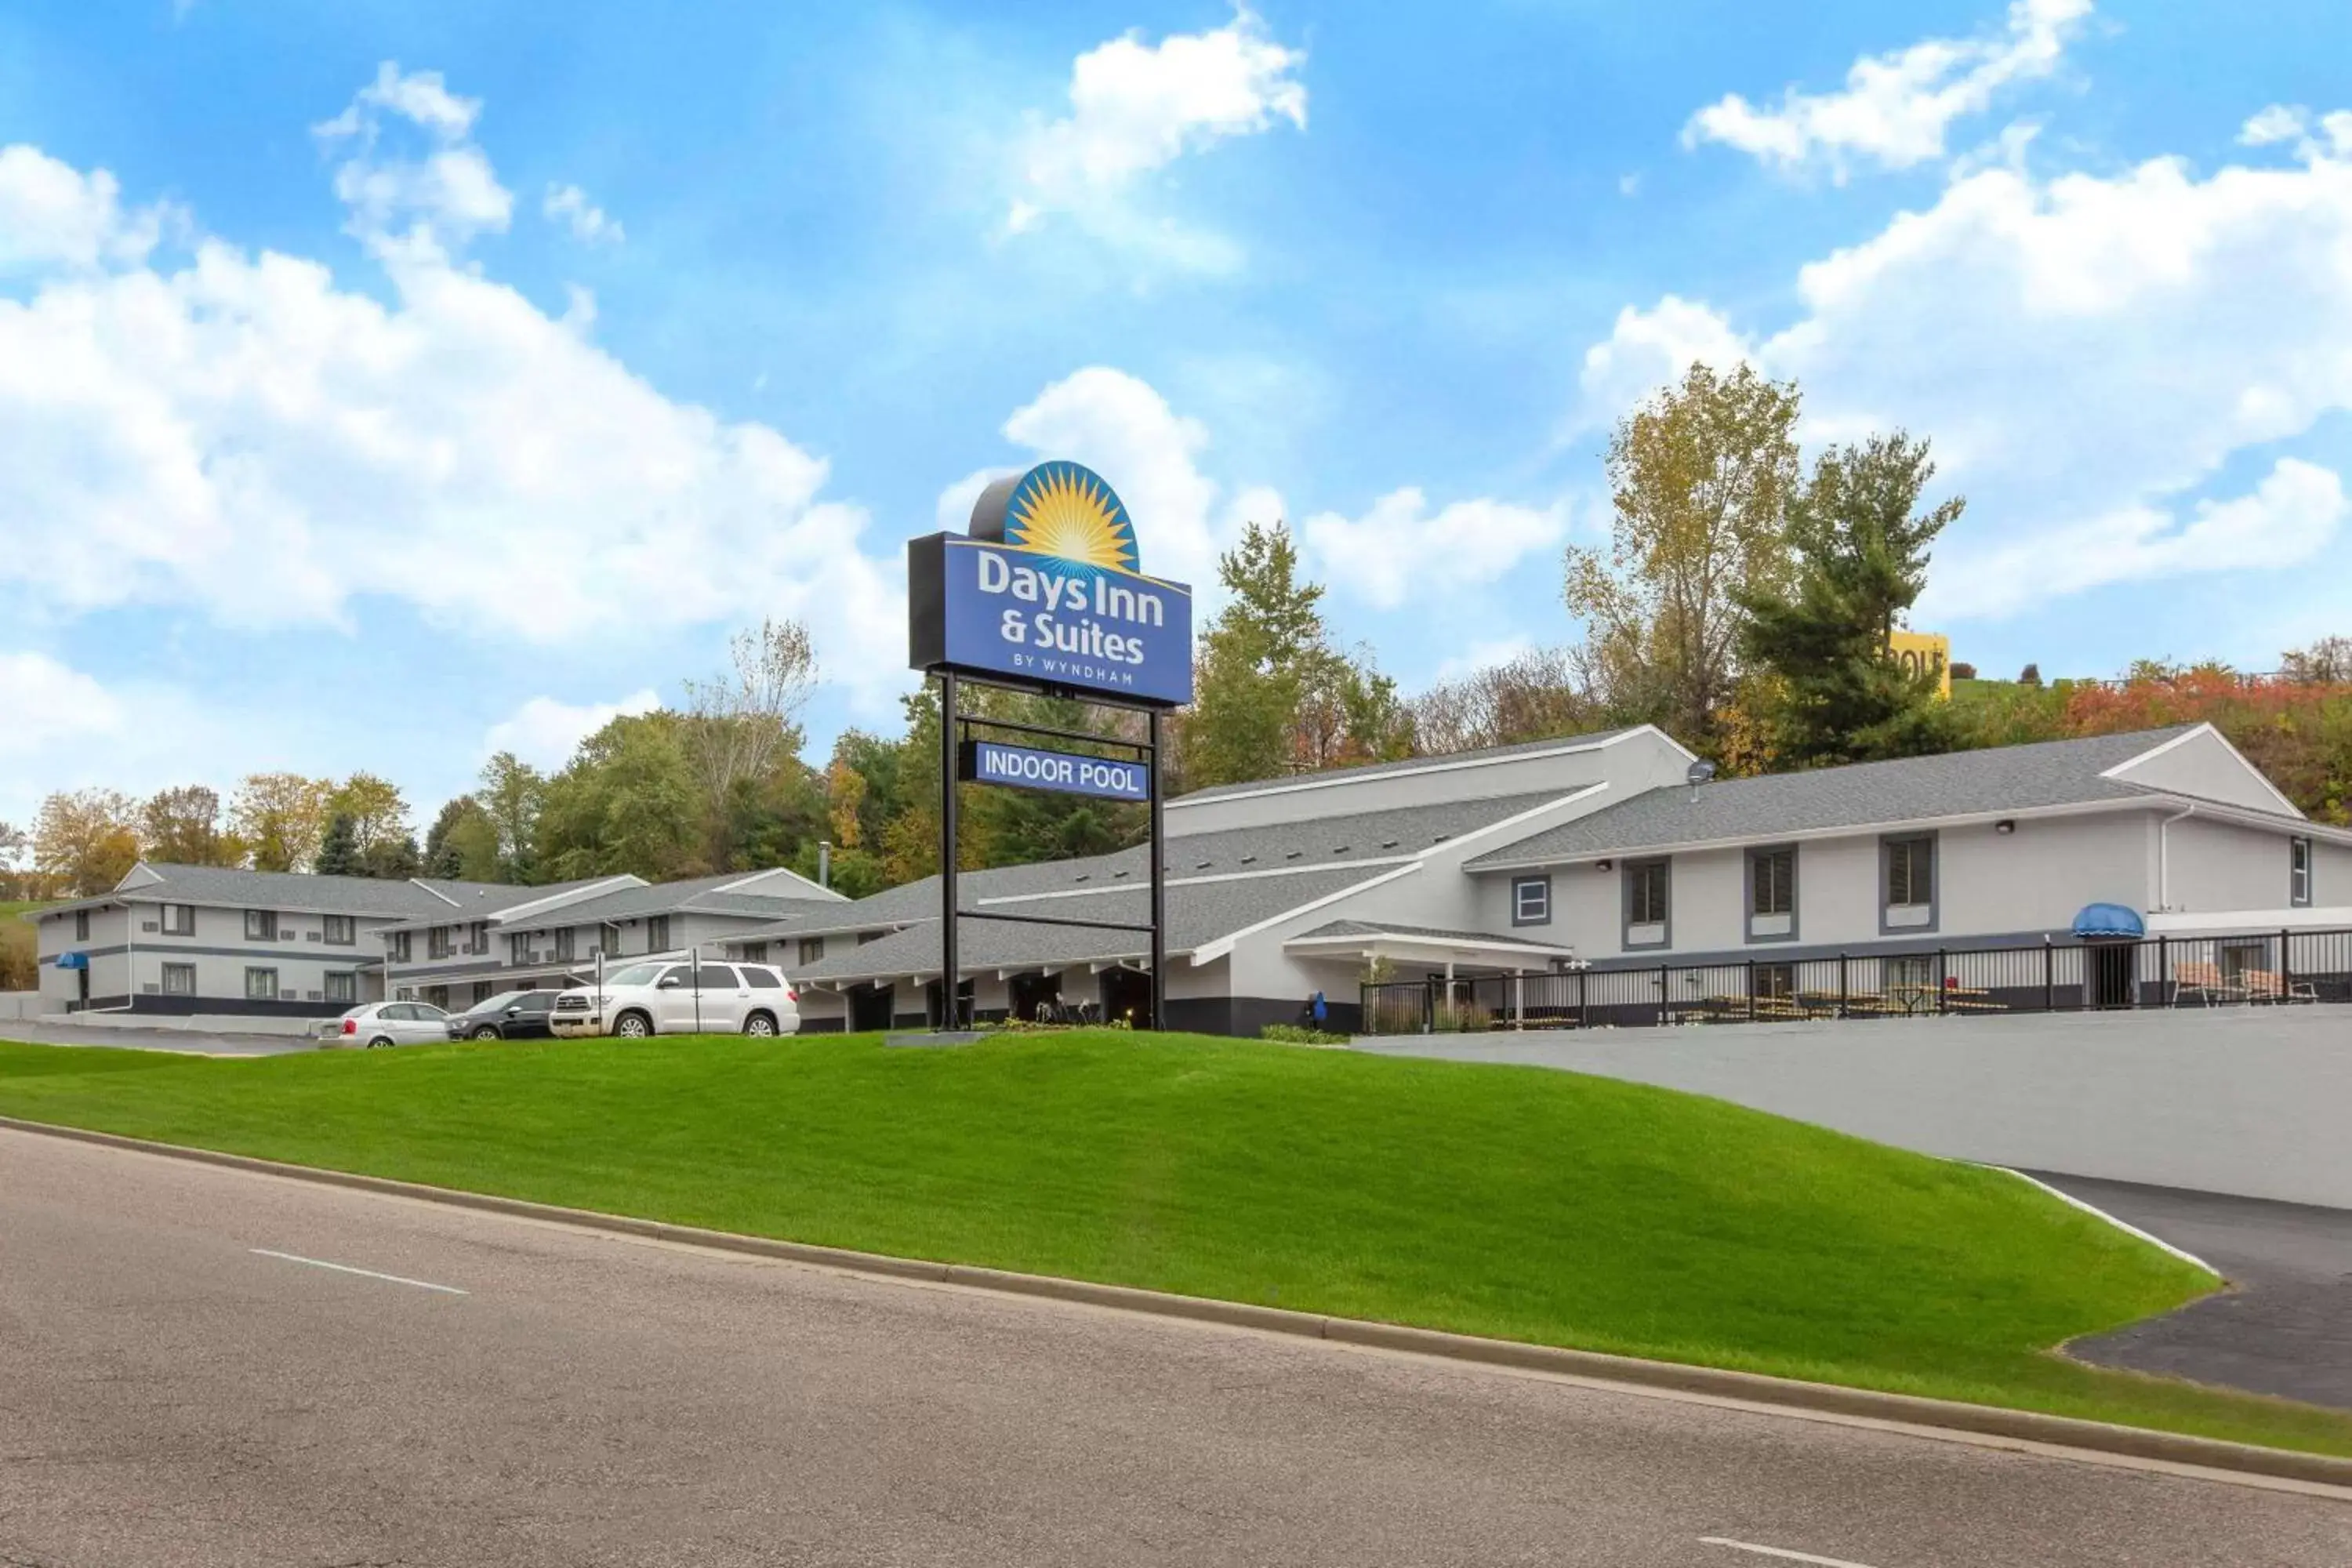 Property Building in Days Inn & Suites by Wyndham Wisconsin Dells